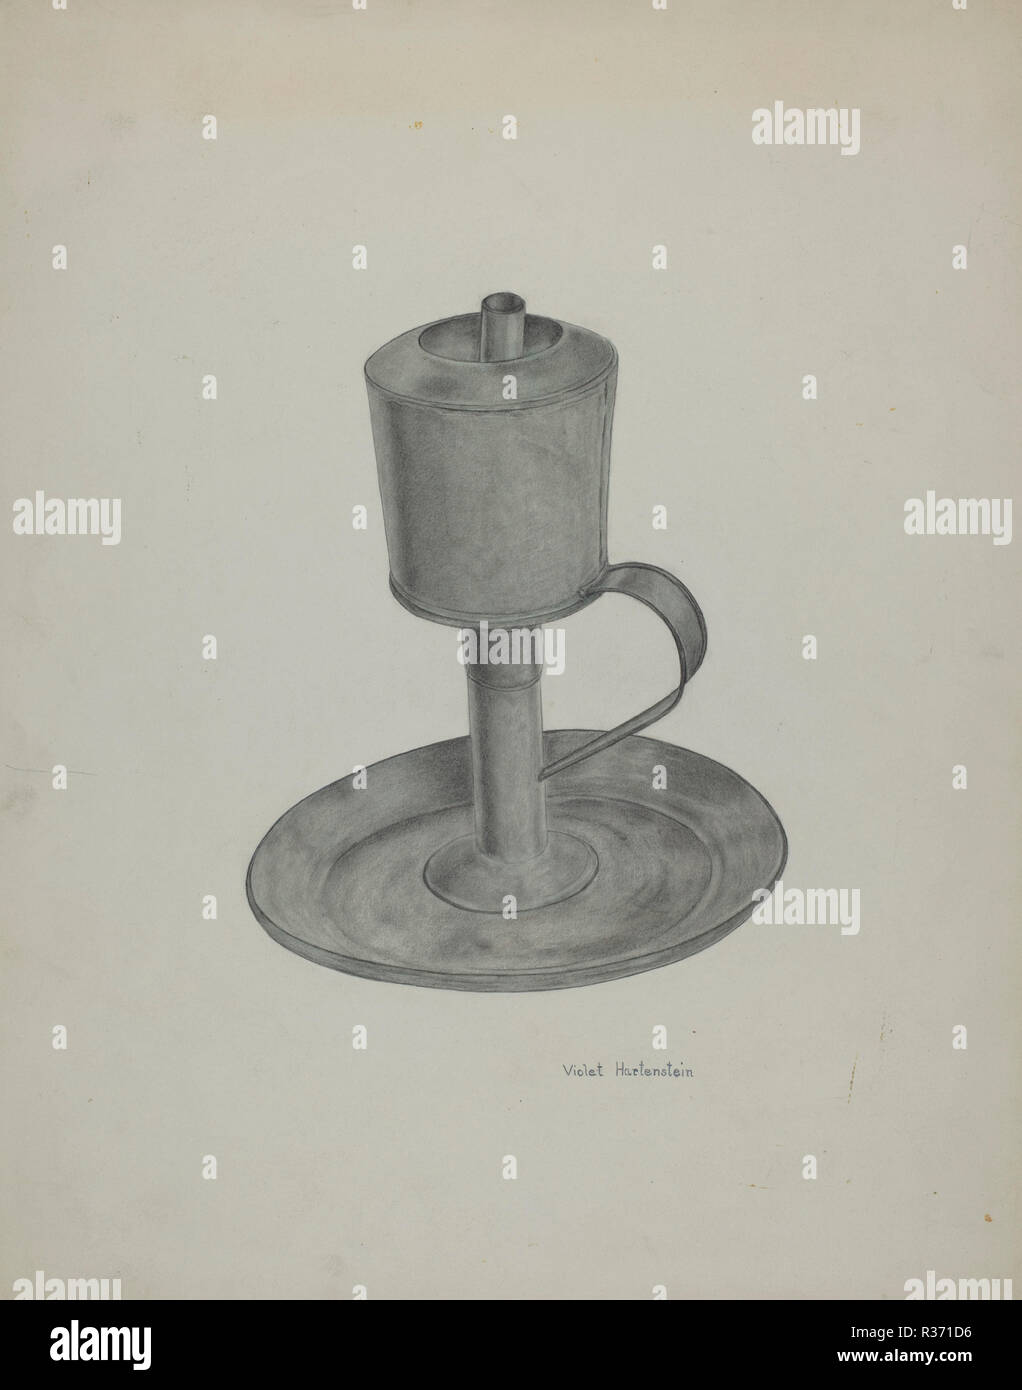 Pewter Grease Lamp. Dated: c. 1941. Dimensions: overall: 37 x 29.2 cm (14 9/16 x 11 1/2 in.). Medium: watercolor and graphite on paperboard. Museum: National Gallery of Art, Washington DC. Author: Violet Hartenstein. Stock Photo